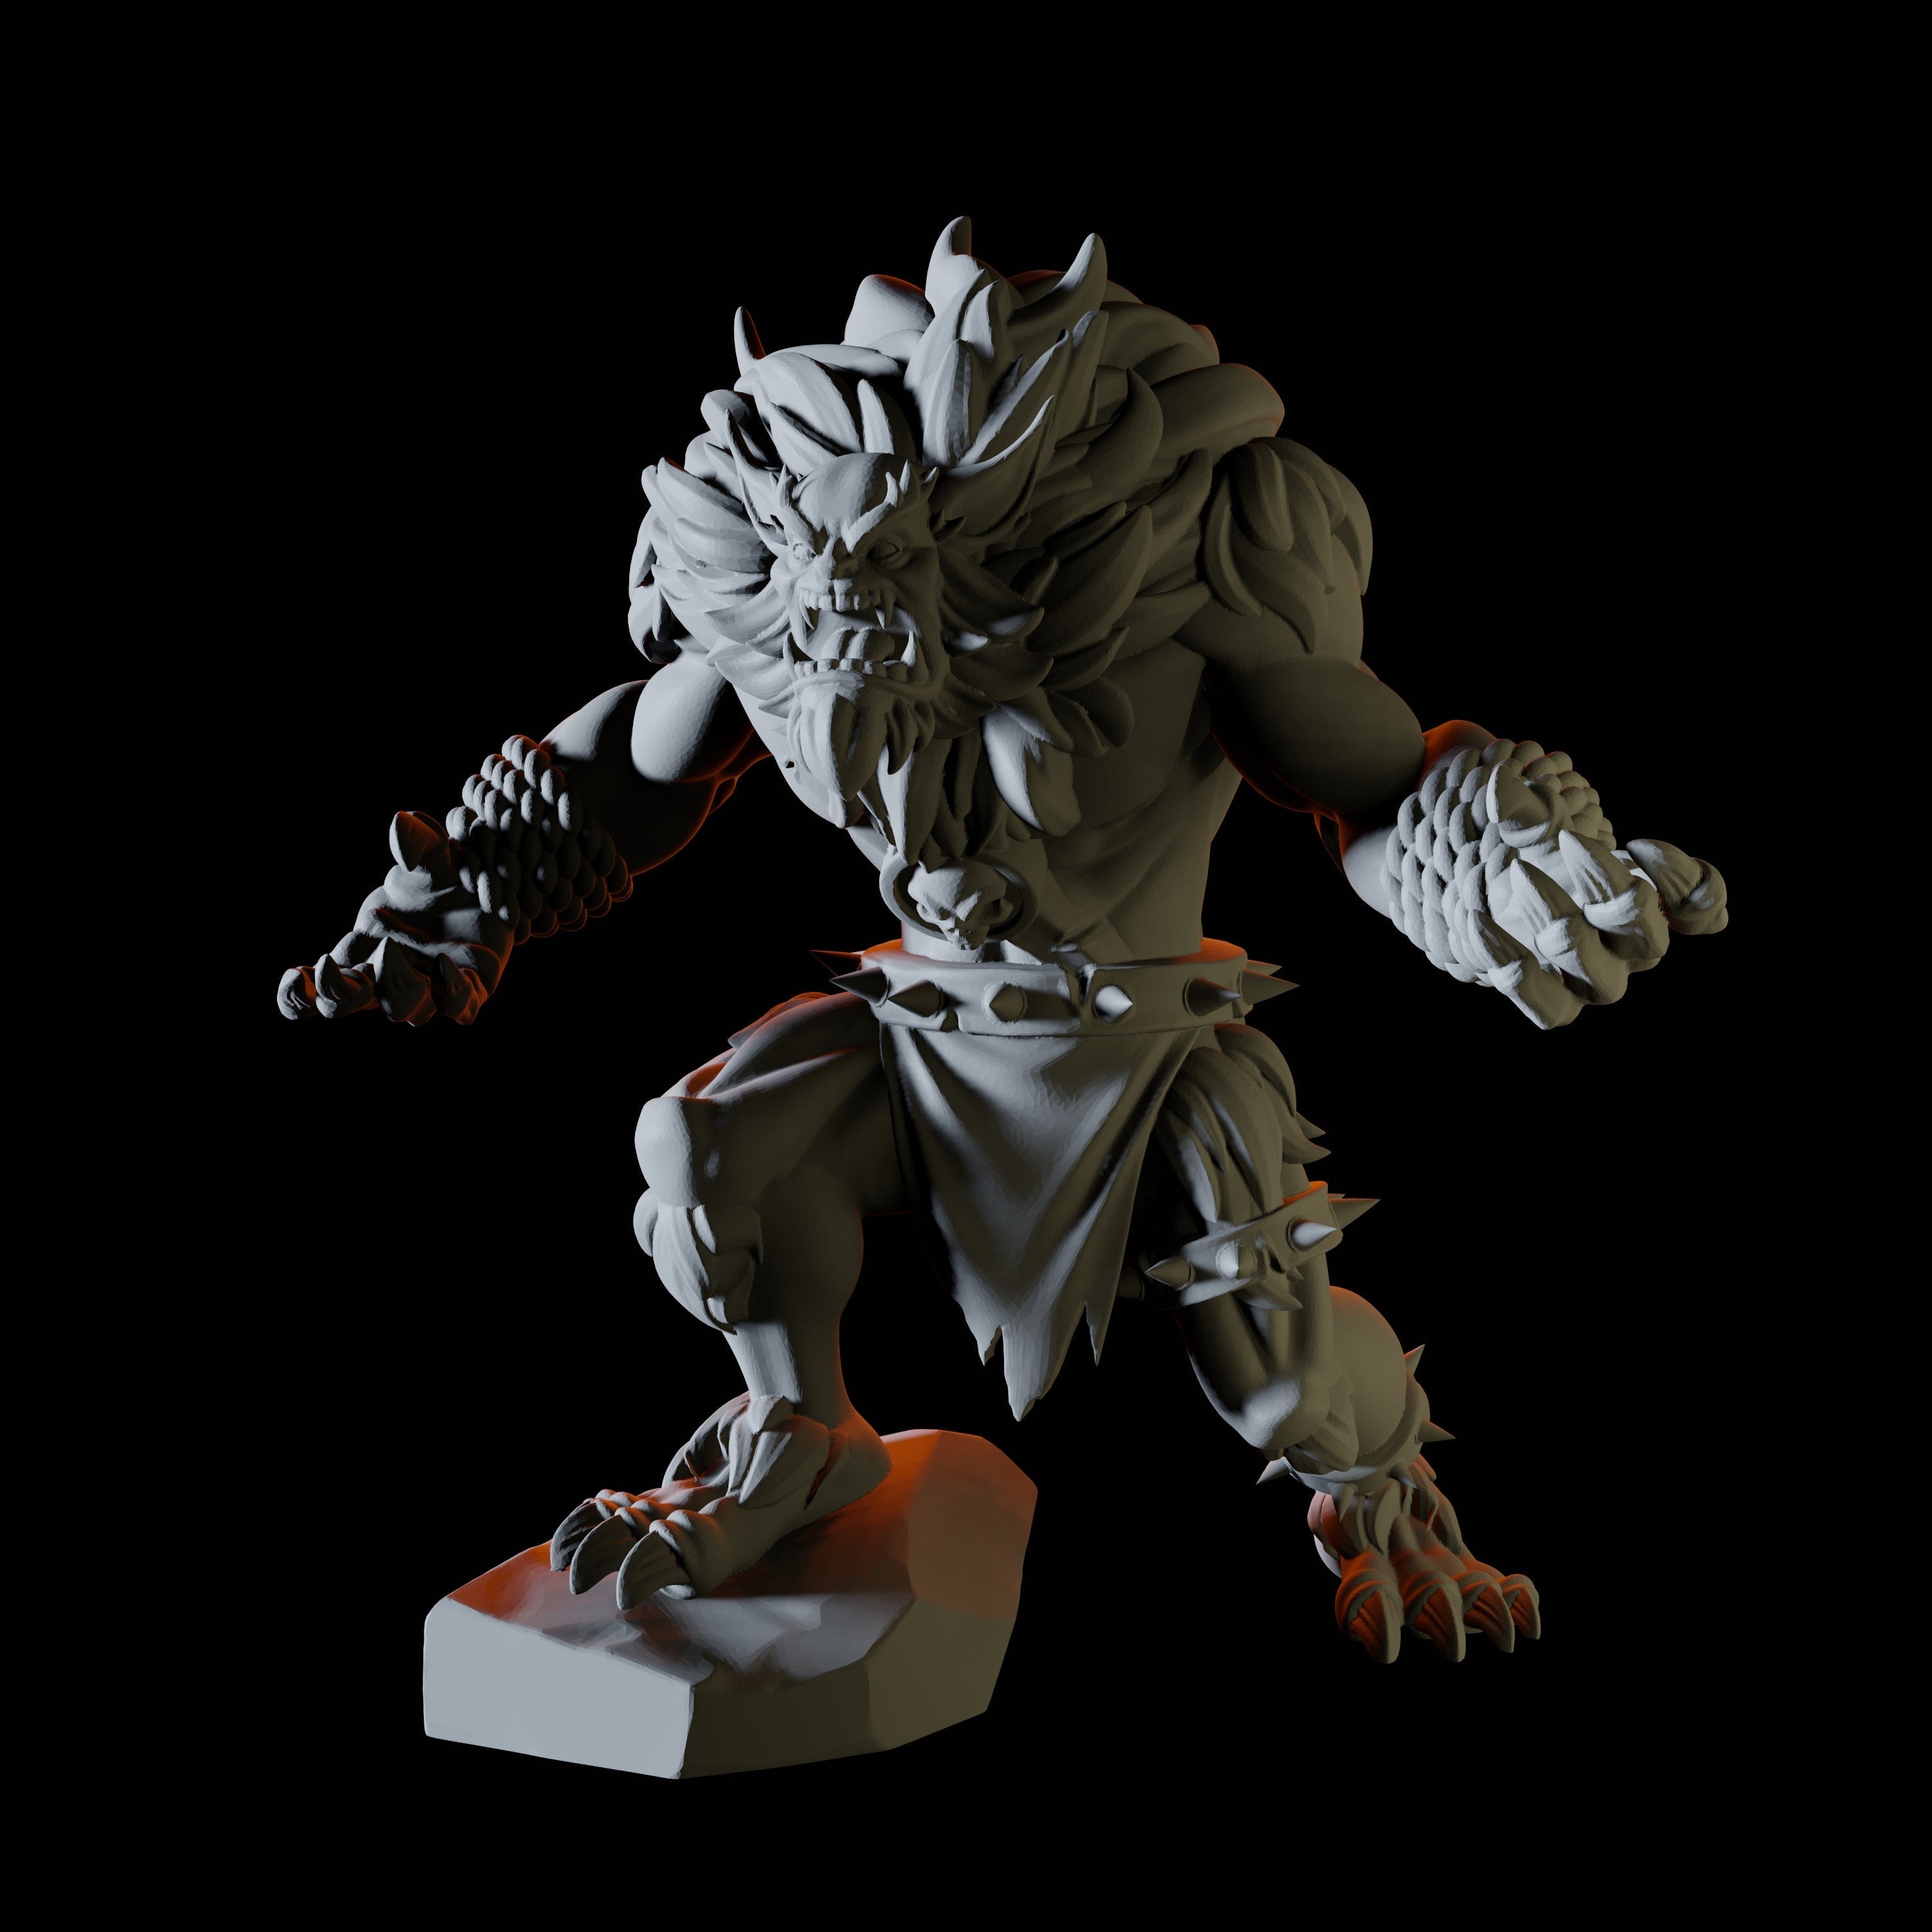 Three Bugbear Miniatures for Dungeons and Dragons - Myth Forged